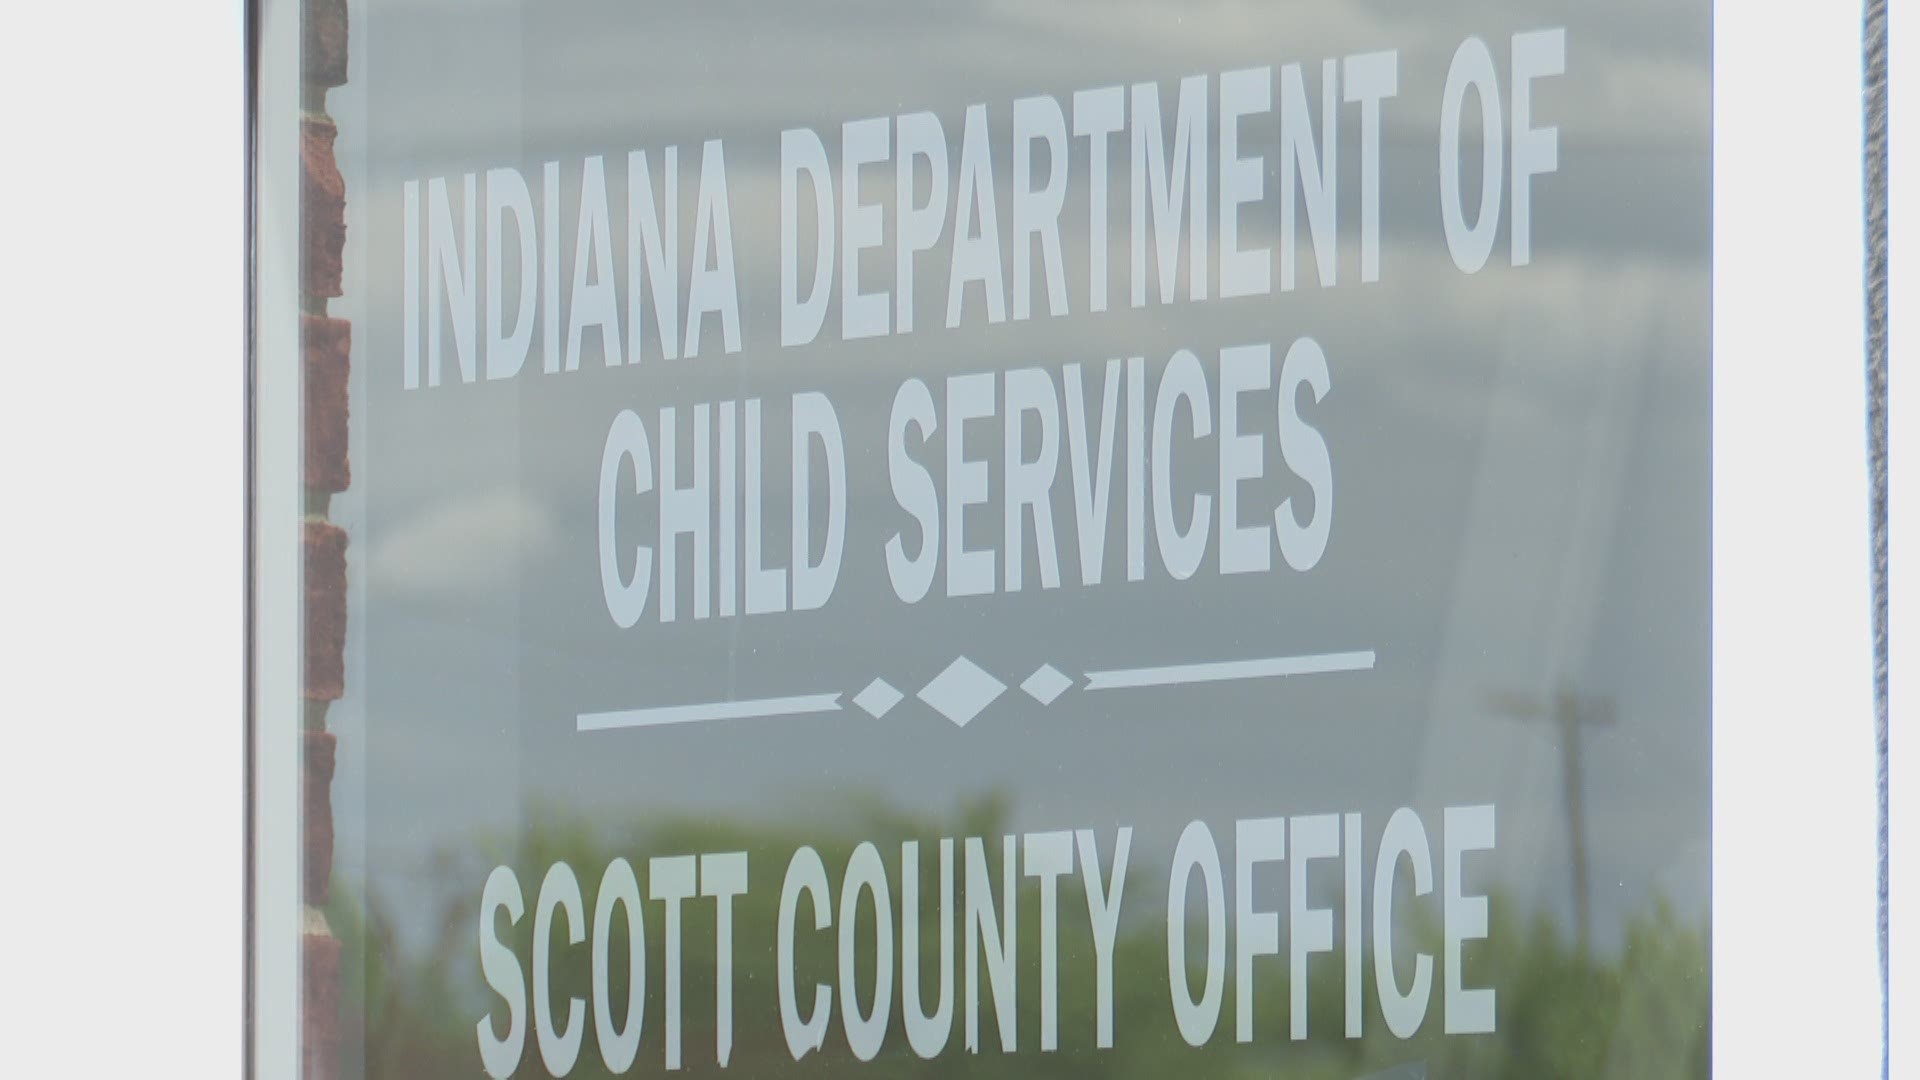 One Scottsburg officer said the infestation was "like nothing I had ever seen before."